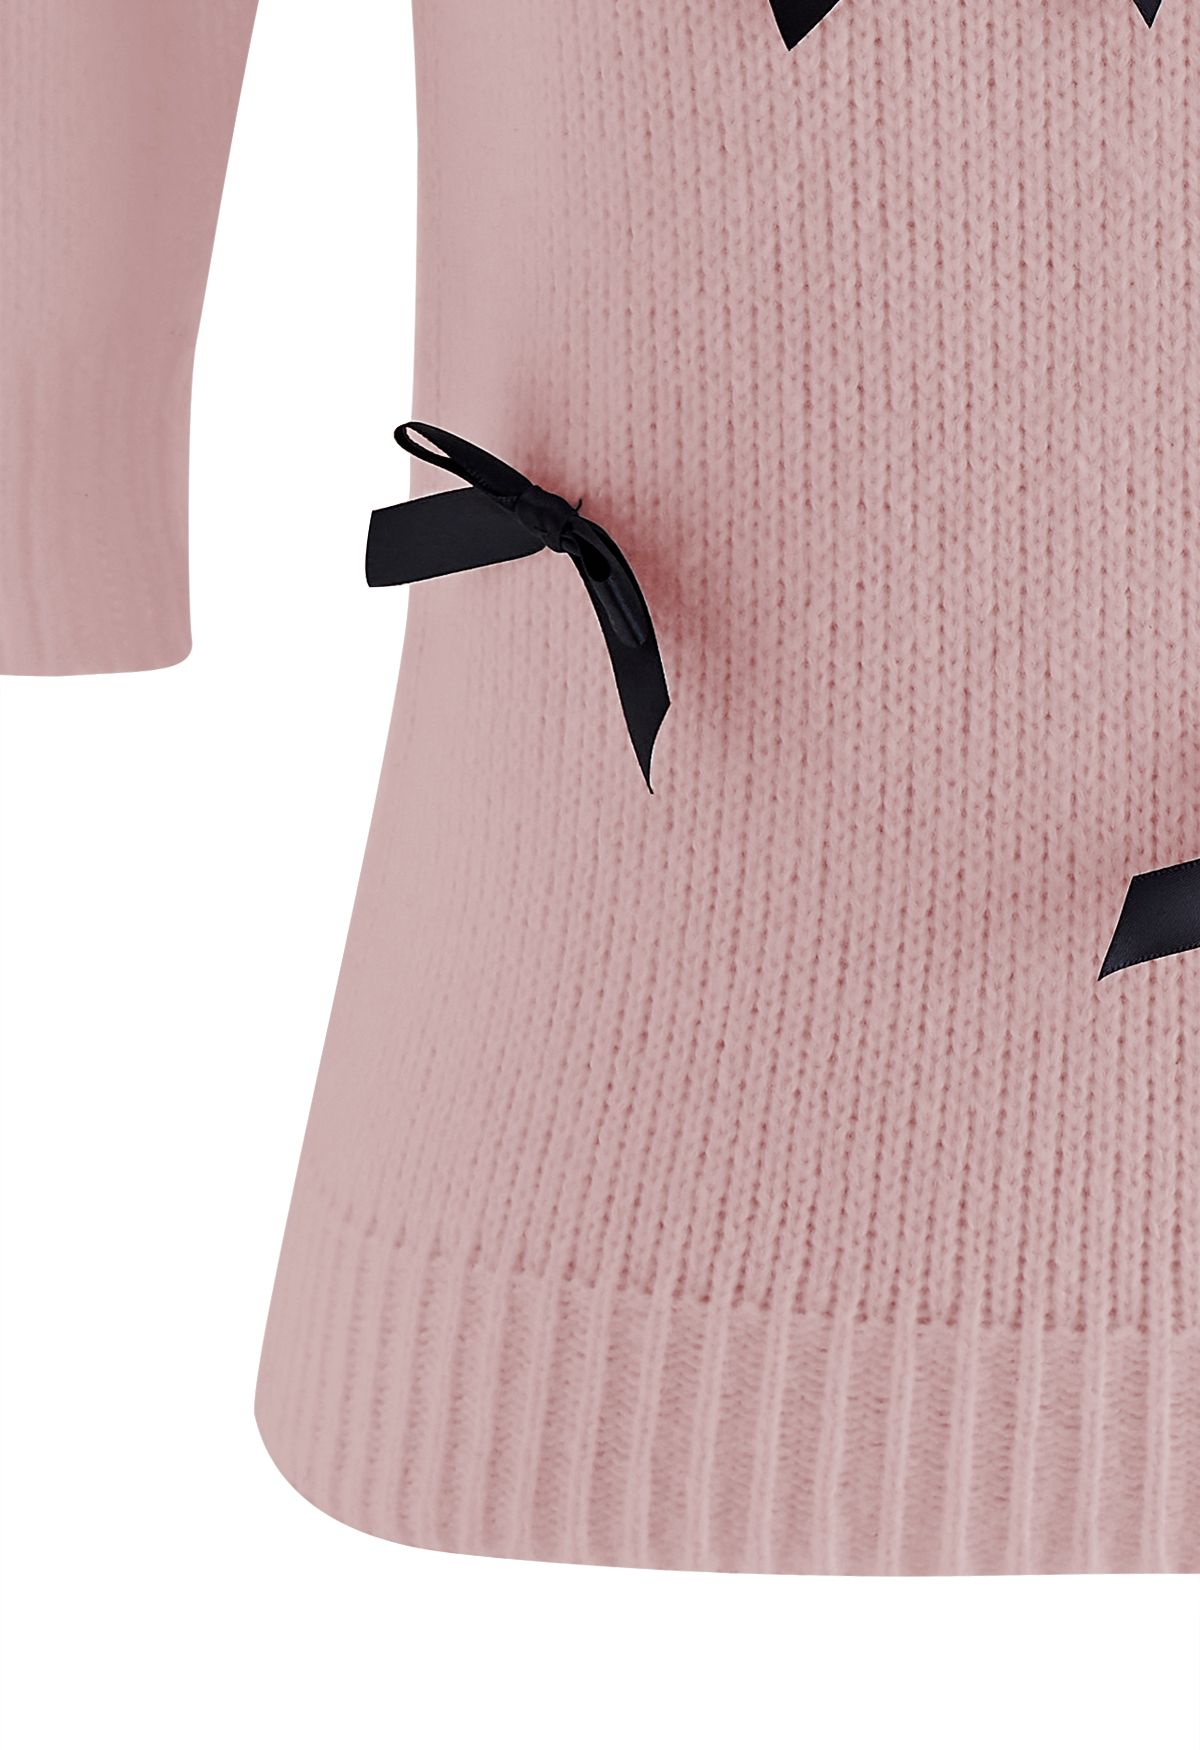 Bowknot Embellished Short Sleeve Knit Sweater in Pink